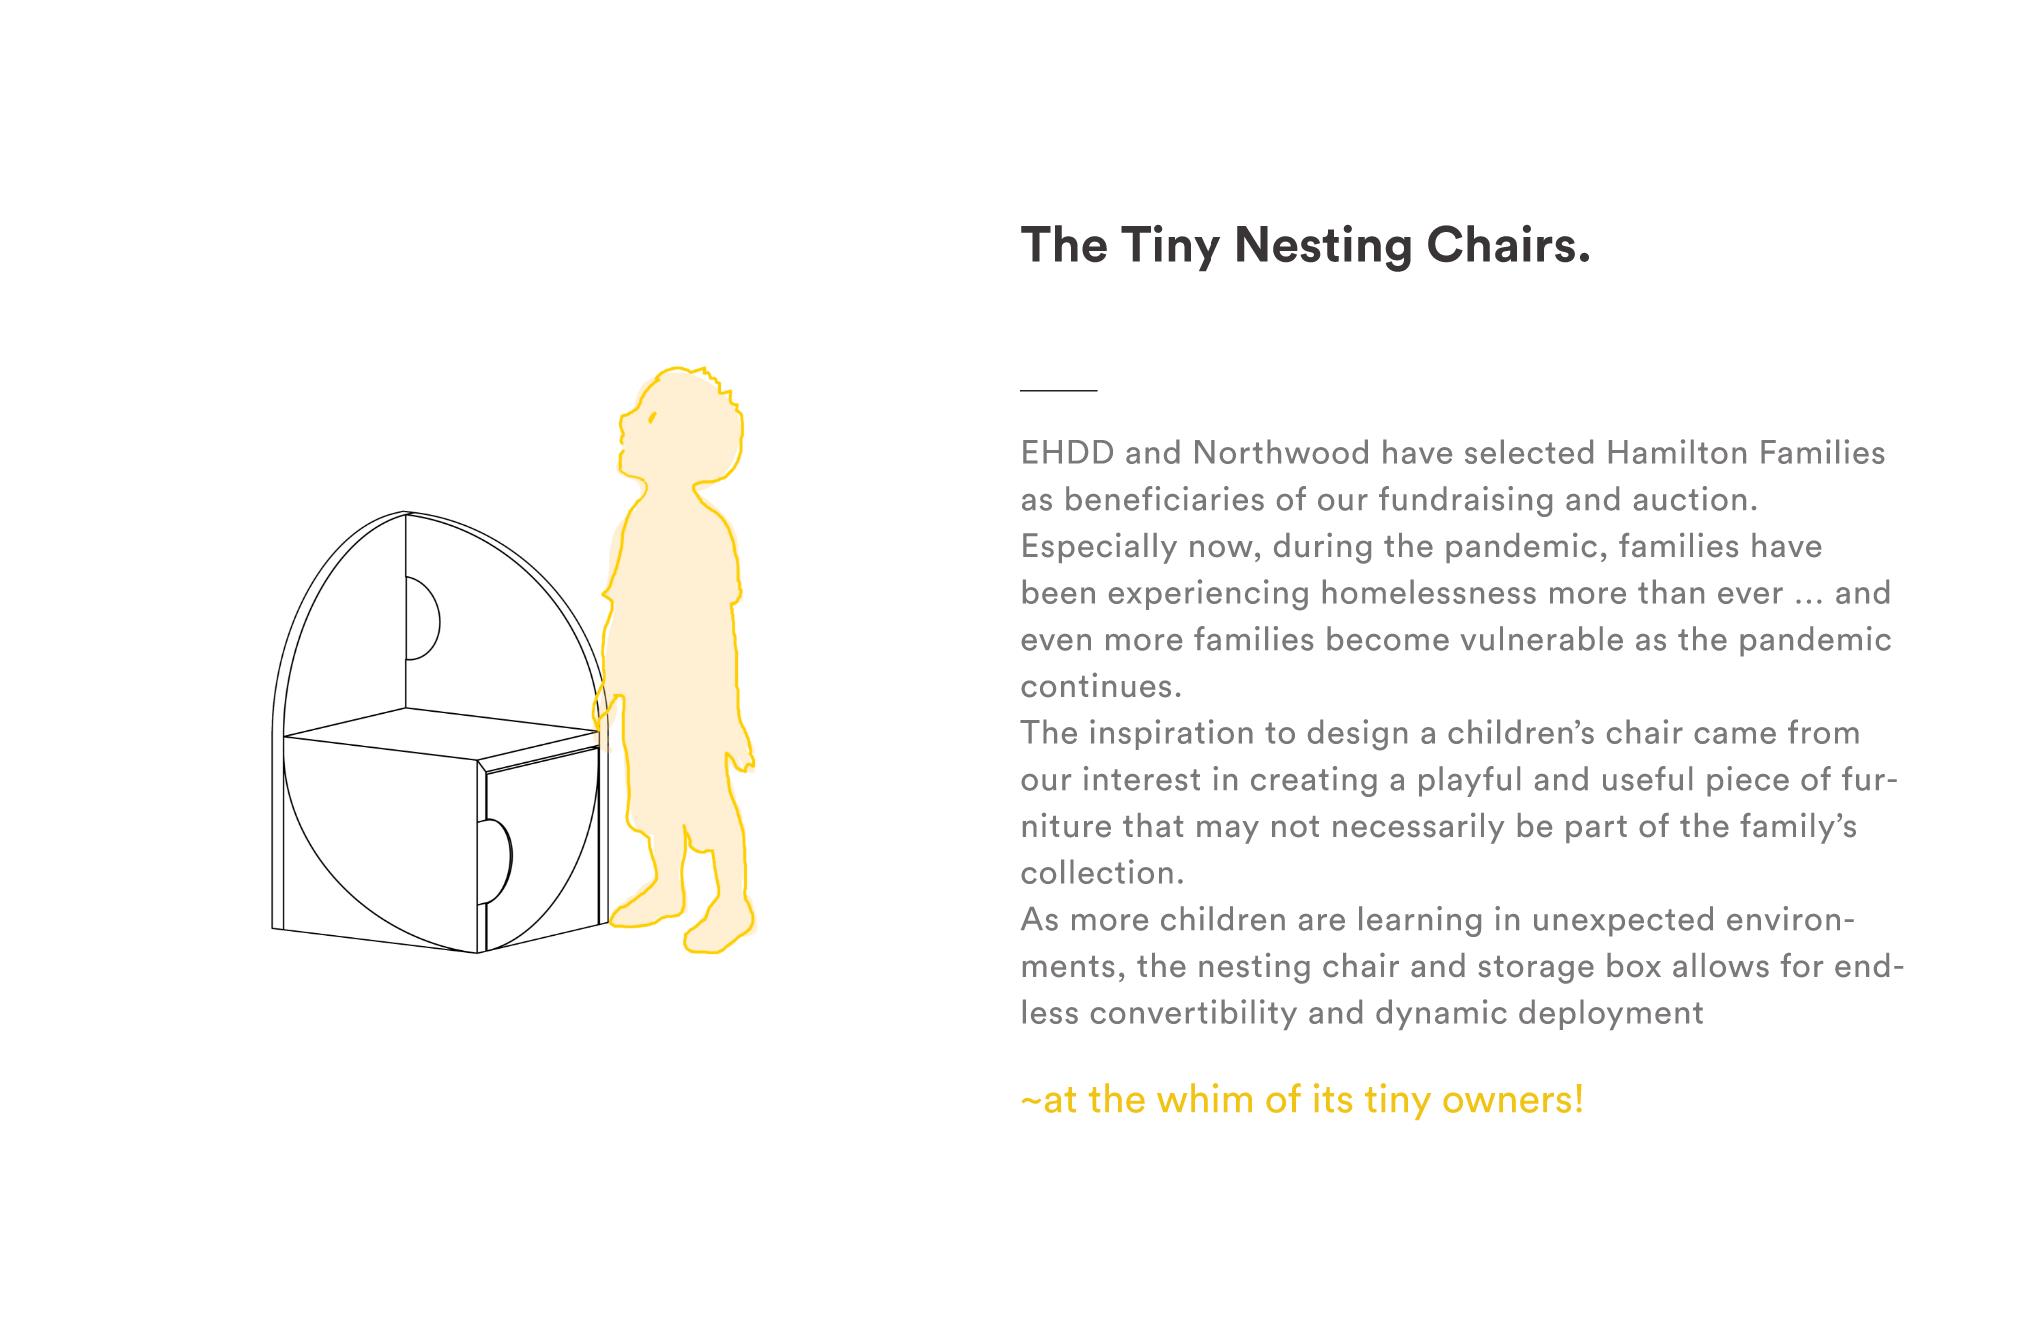 THE TINY NESTING CHAIRS.